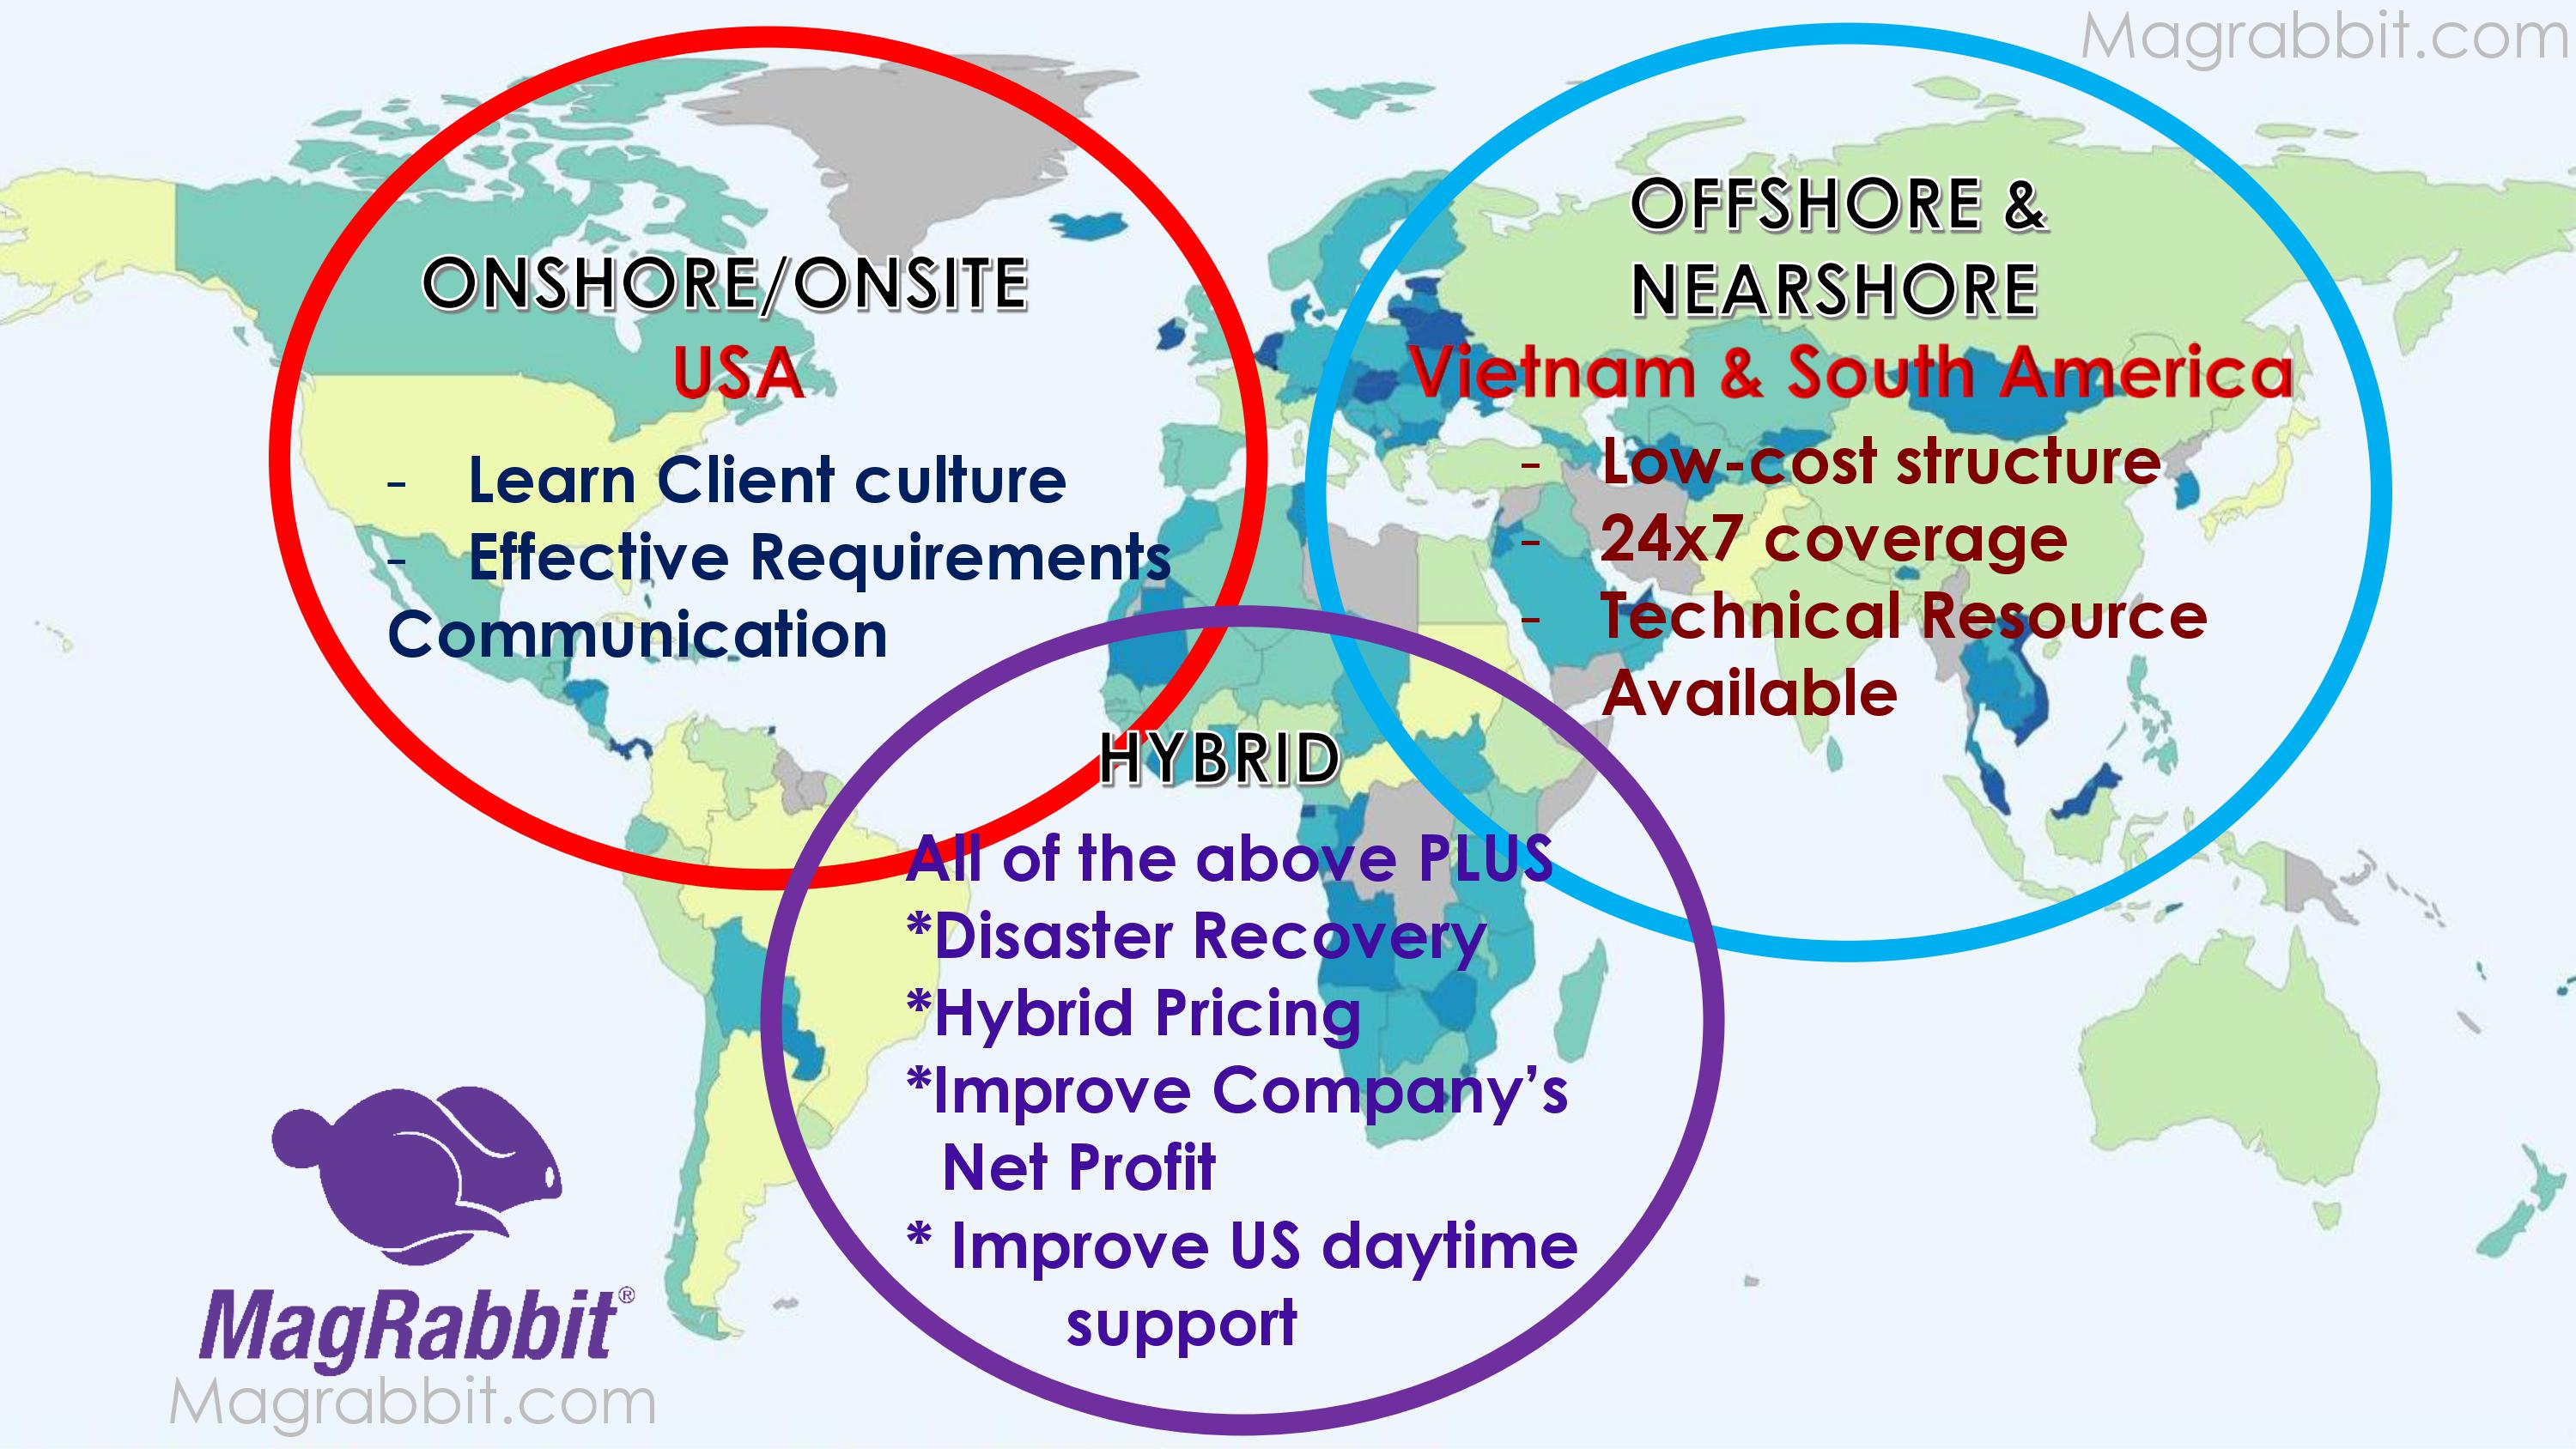 What are onsite/ offsite, onshore/offshore, hybrid/dual models?